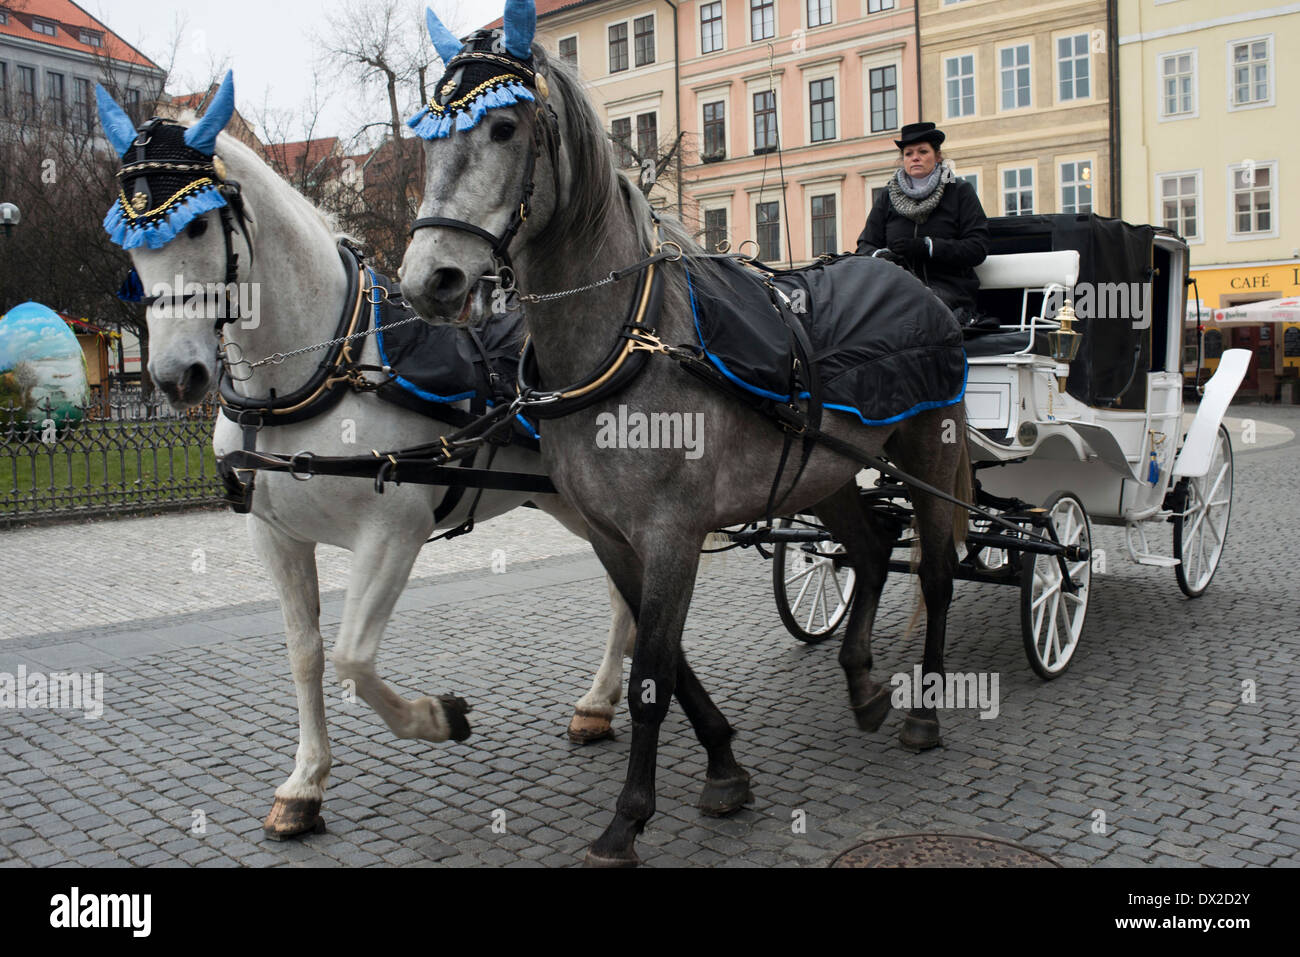 Horse drawn tour in the Old Town Square. The Old Town Square .The Old Town Square is one of the nicest places in Prague. Stock Photo